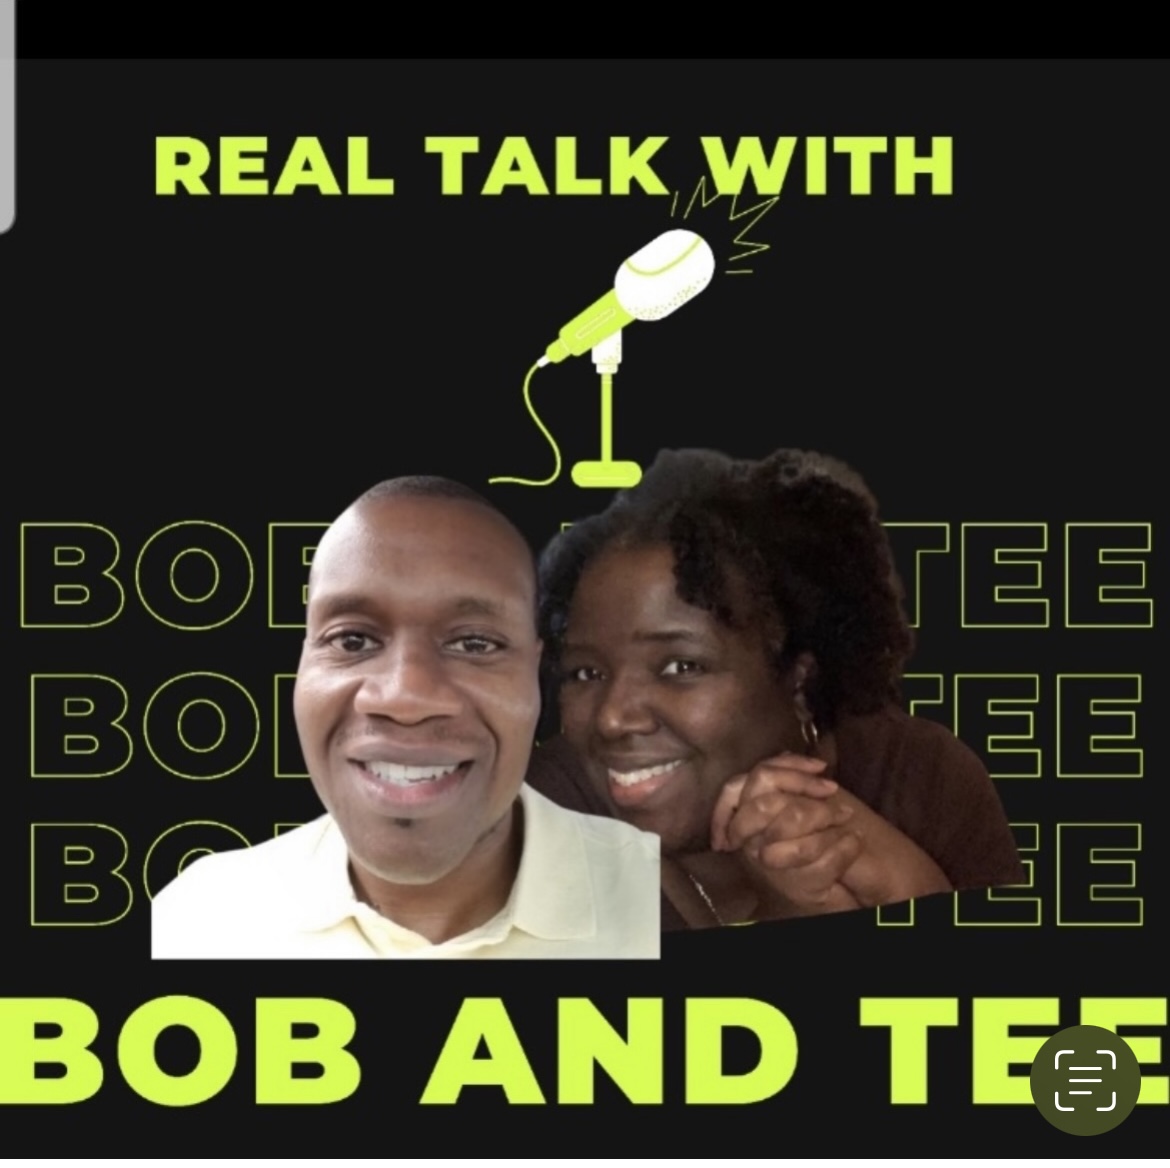 Art for Real Talk with Bob and Tee 8am by Untitled Artist